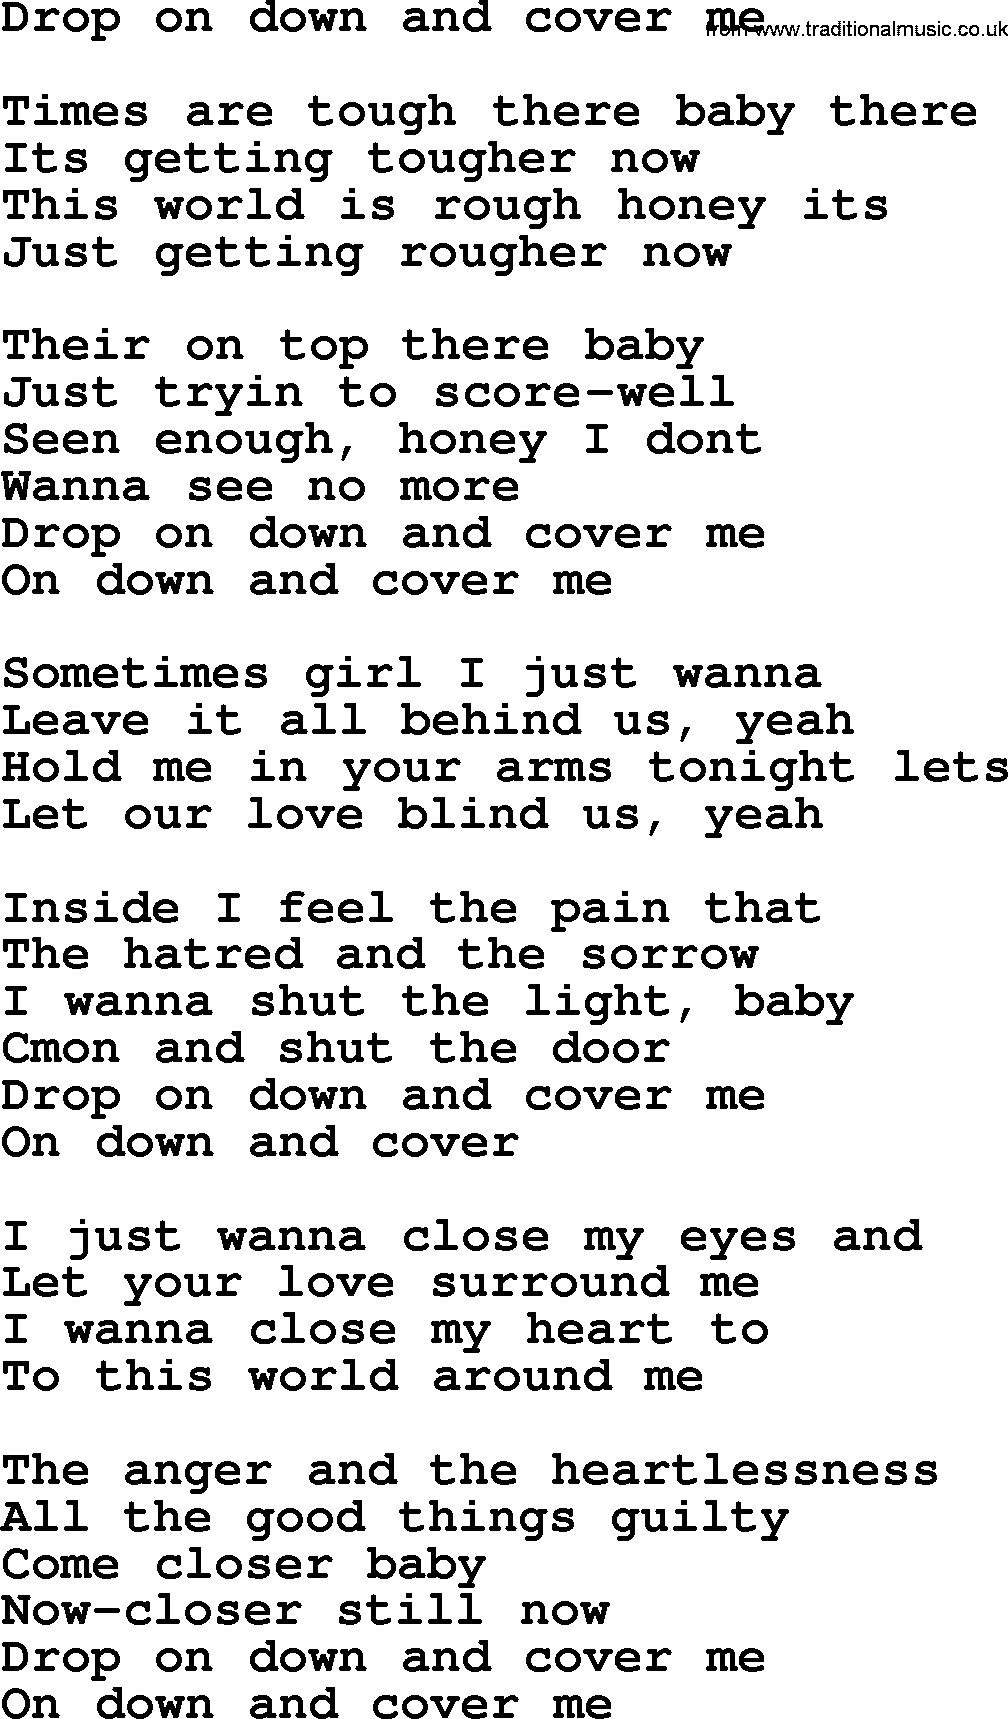 Bruce Springsteen song: Drop On Down And Cover Me lyrics